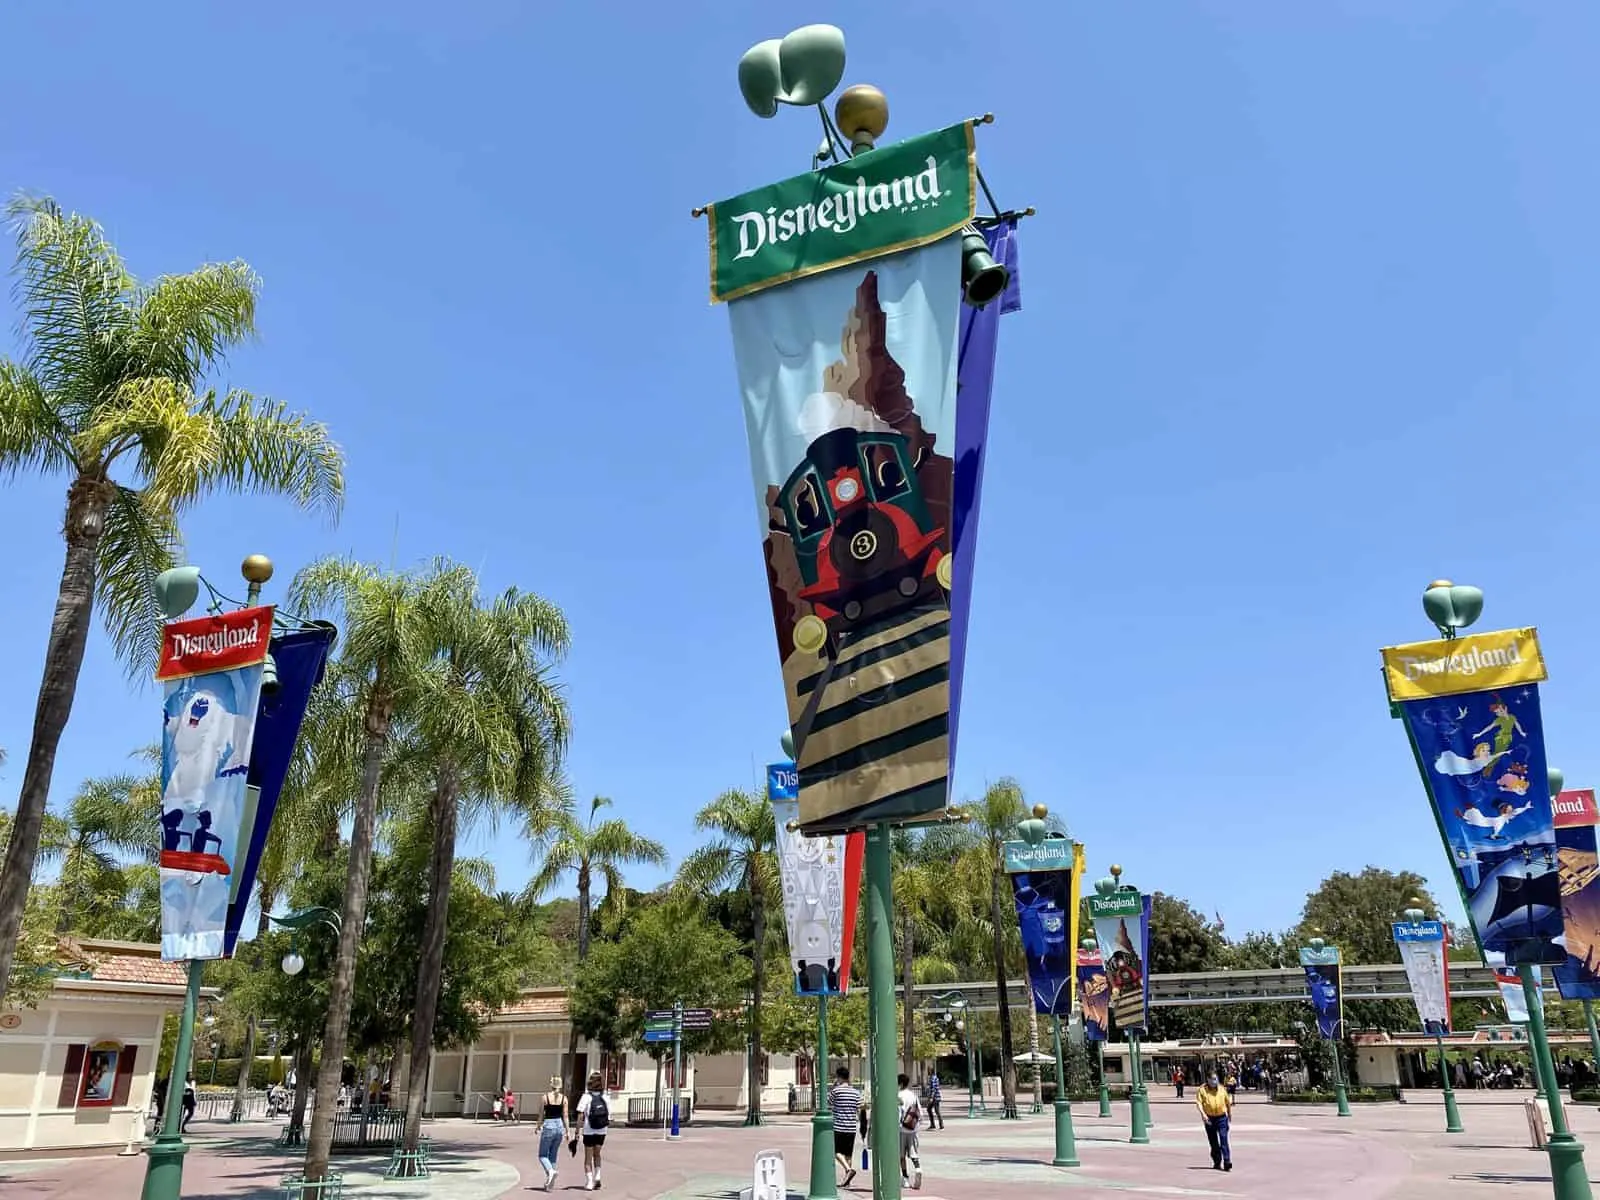 New 2022 Disneyland Summer Ticket Offer Now Available For California Residents